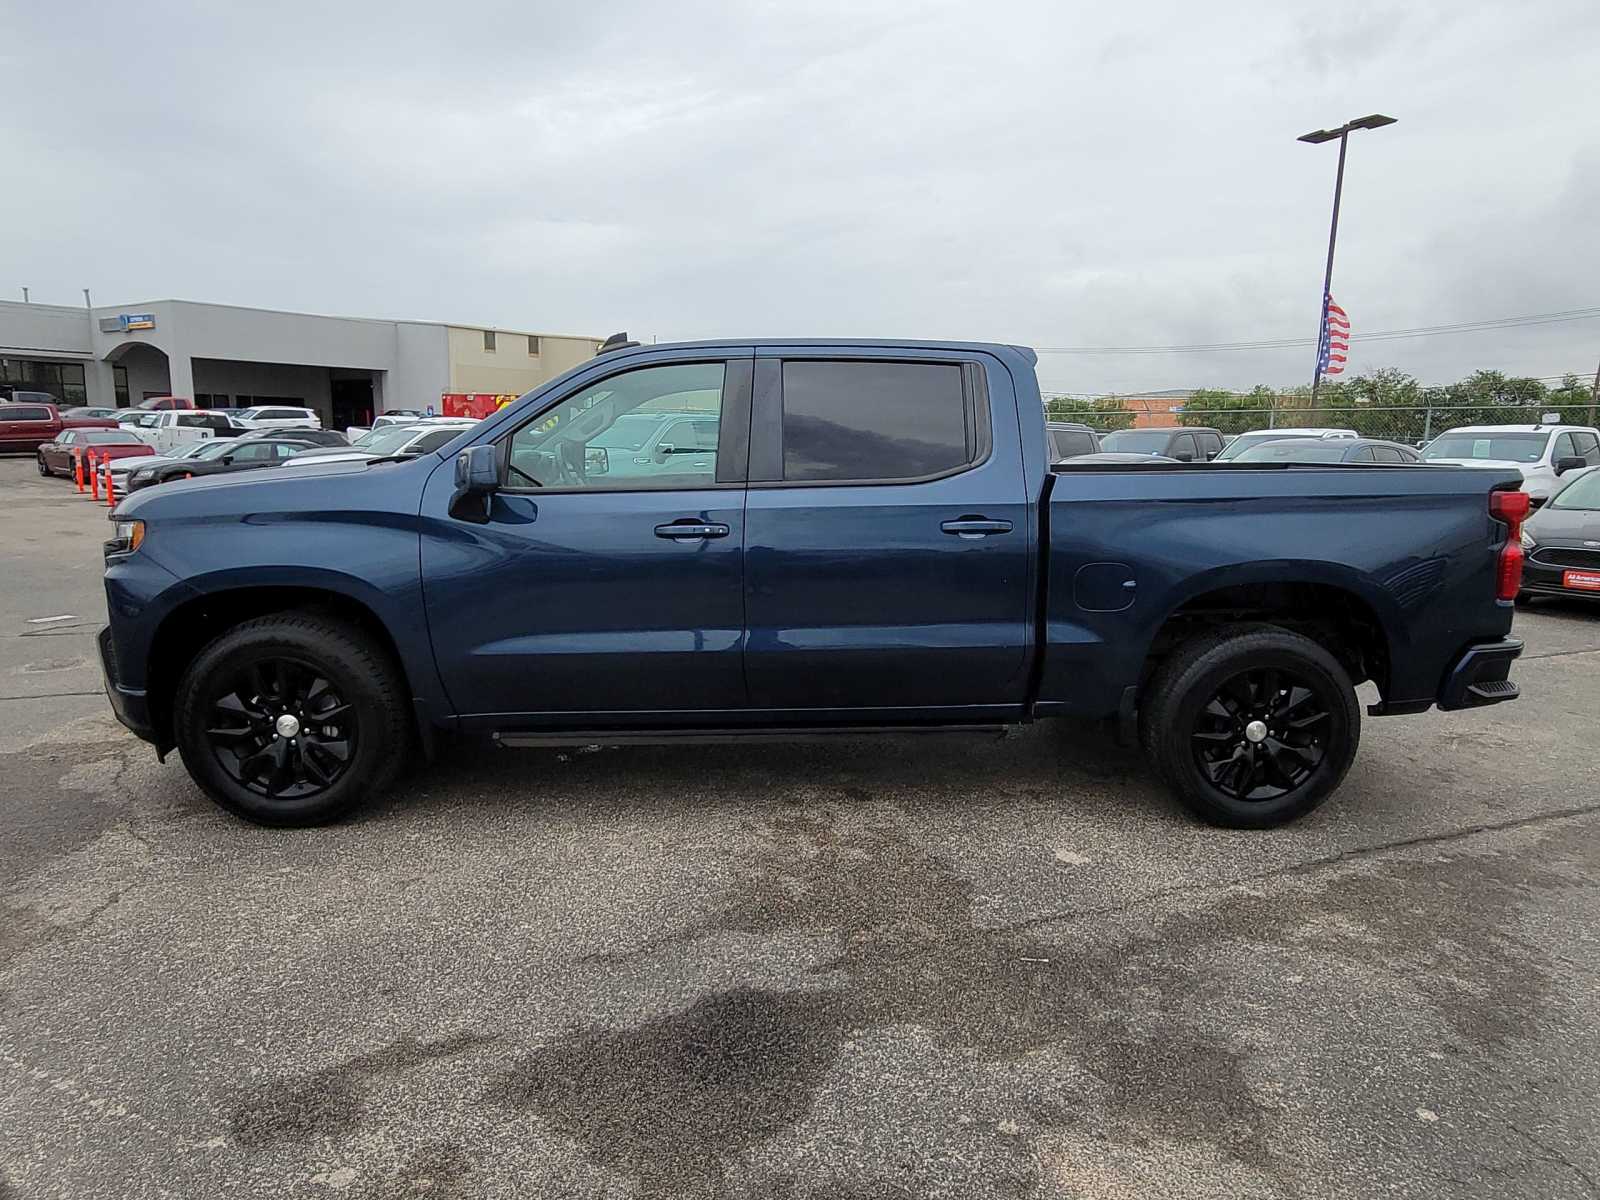 Used 2020 Chevrolet Silverado 1500 LT with VIN 3GCPWCED1LG318588 for sale in Midland, TX